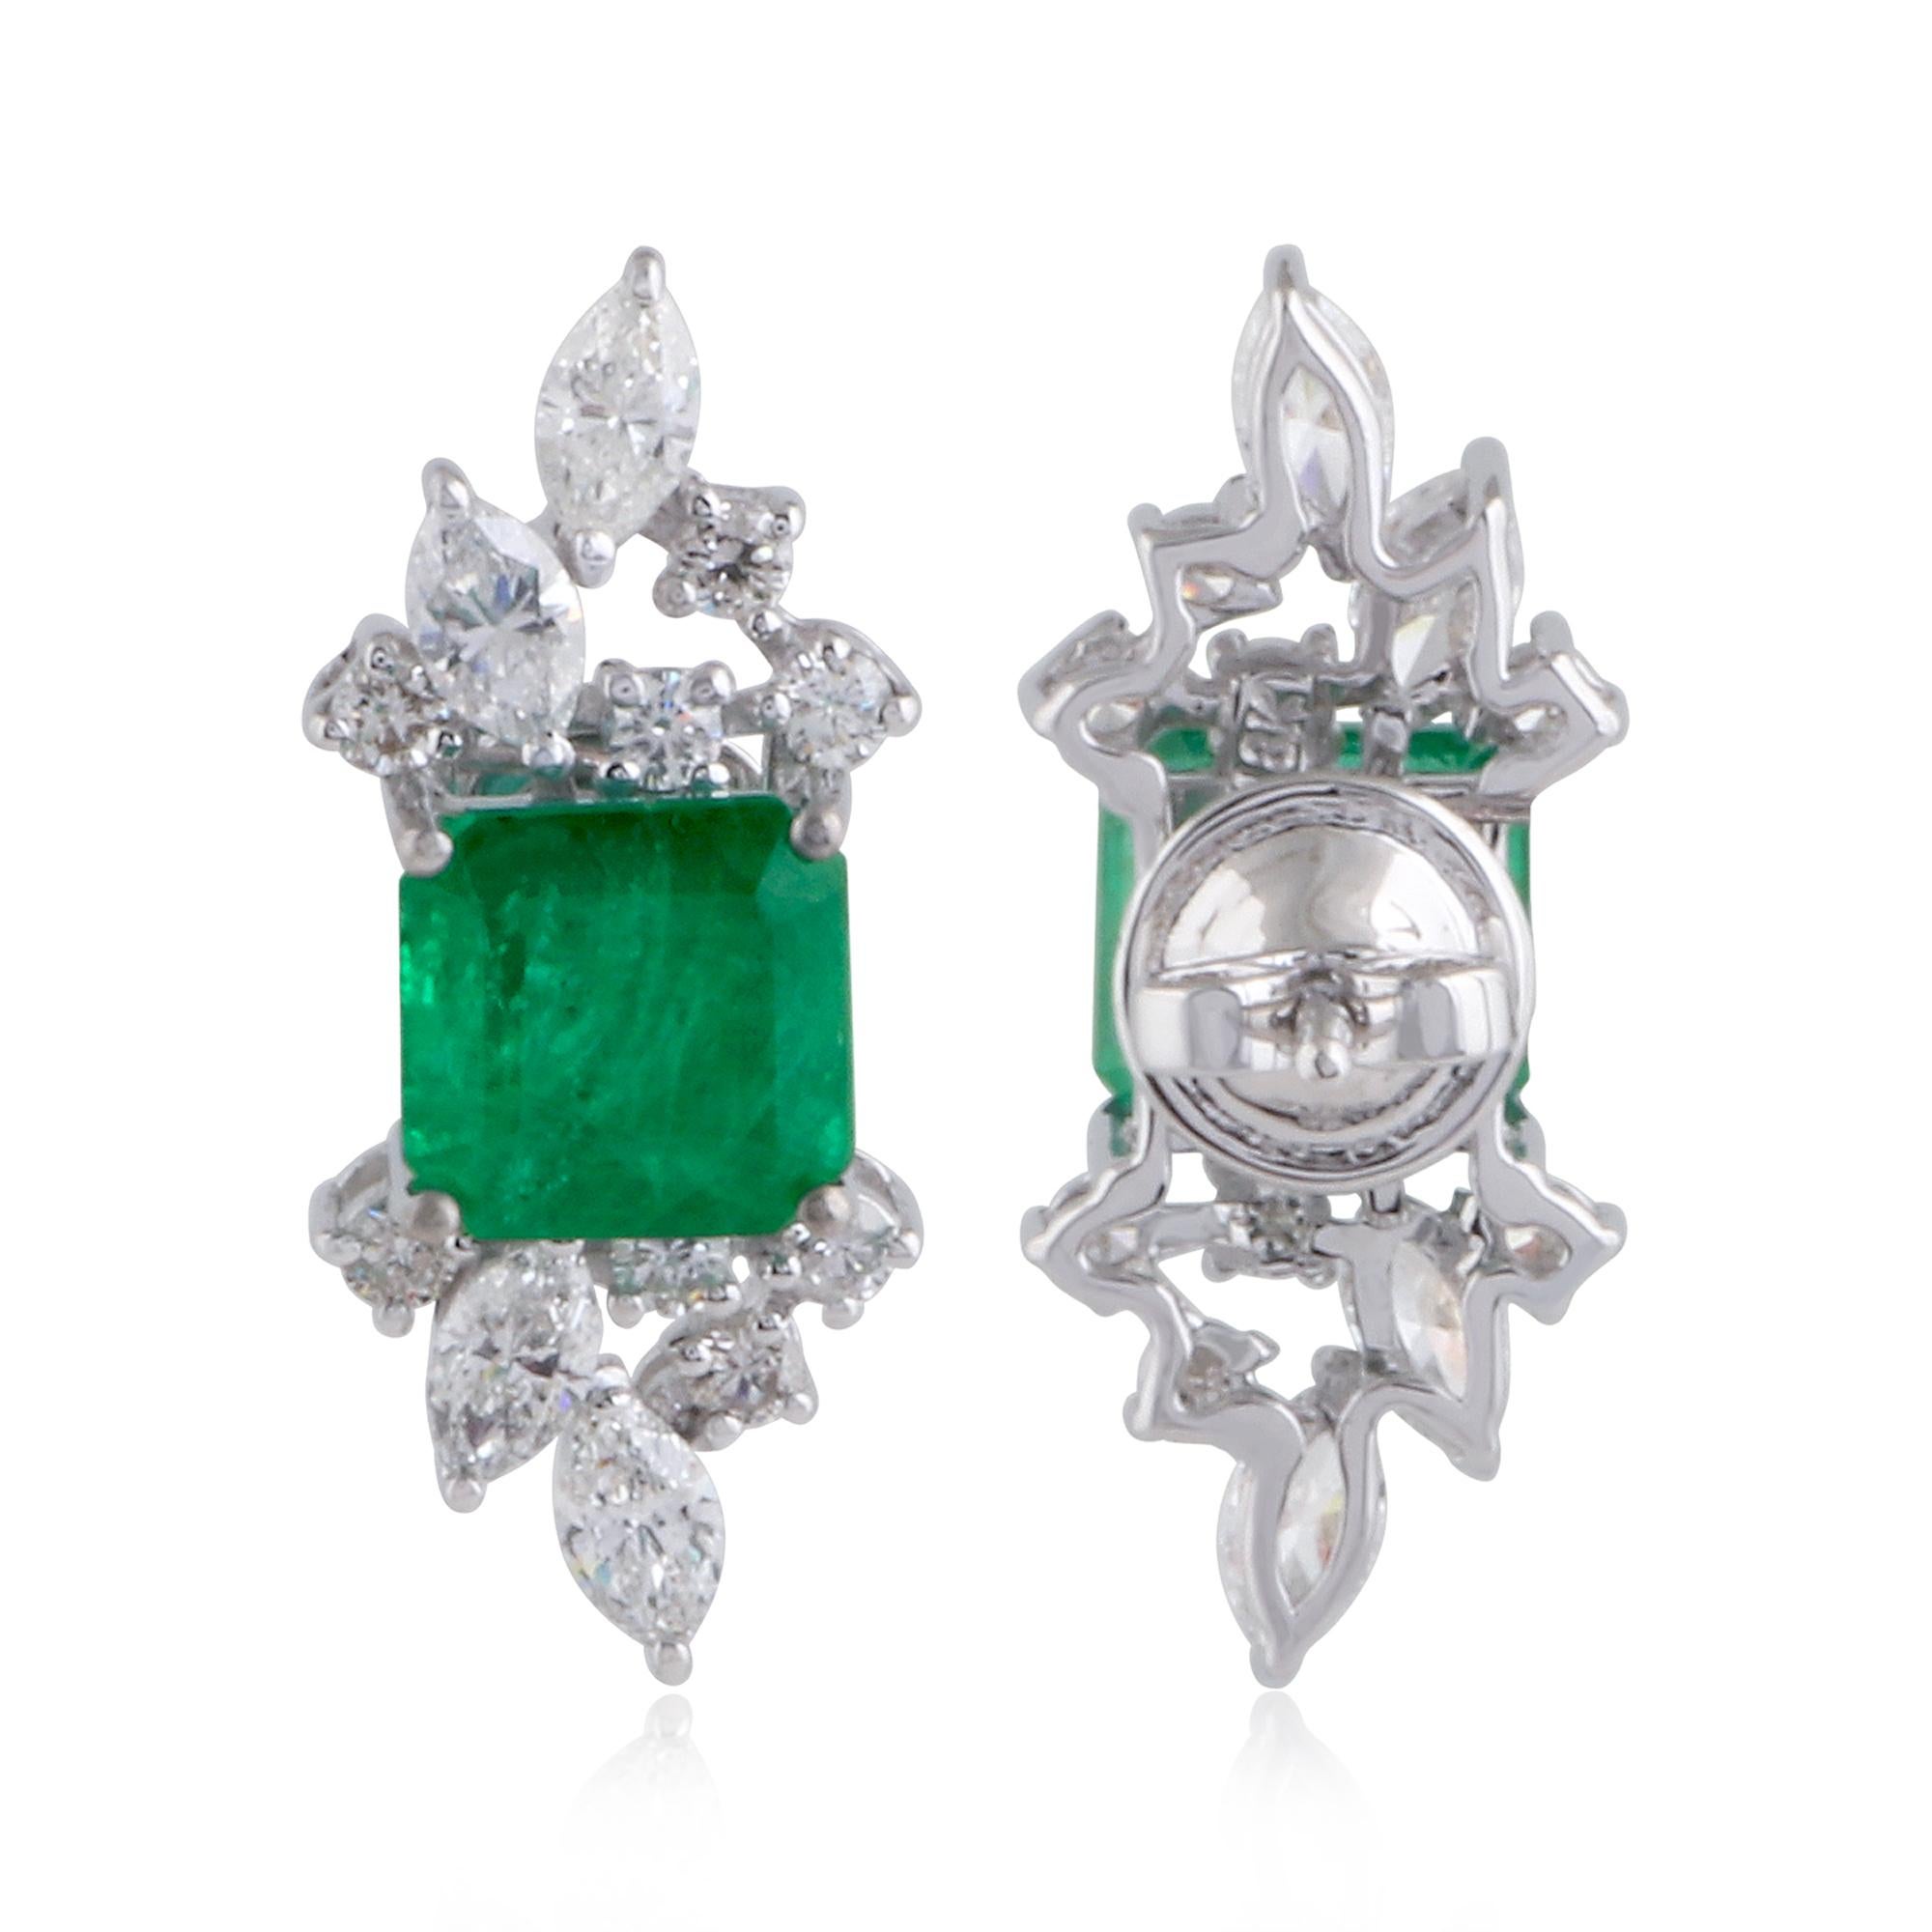 Item Code :- CN-40042
Gross Weight :- 5.83 gm
18k White Gold Weight :- 4.70 gm
Diamond Weight :- 1.60 carat  ( AVERAGE DIAMOND CLARITY SI1-SI2 & COLOR H-I )
Emerald Weight :- 4.03 carat
Earrings Size :- 24x10.50 mm approx.
✦